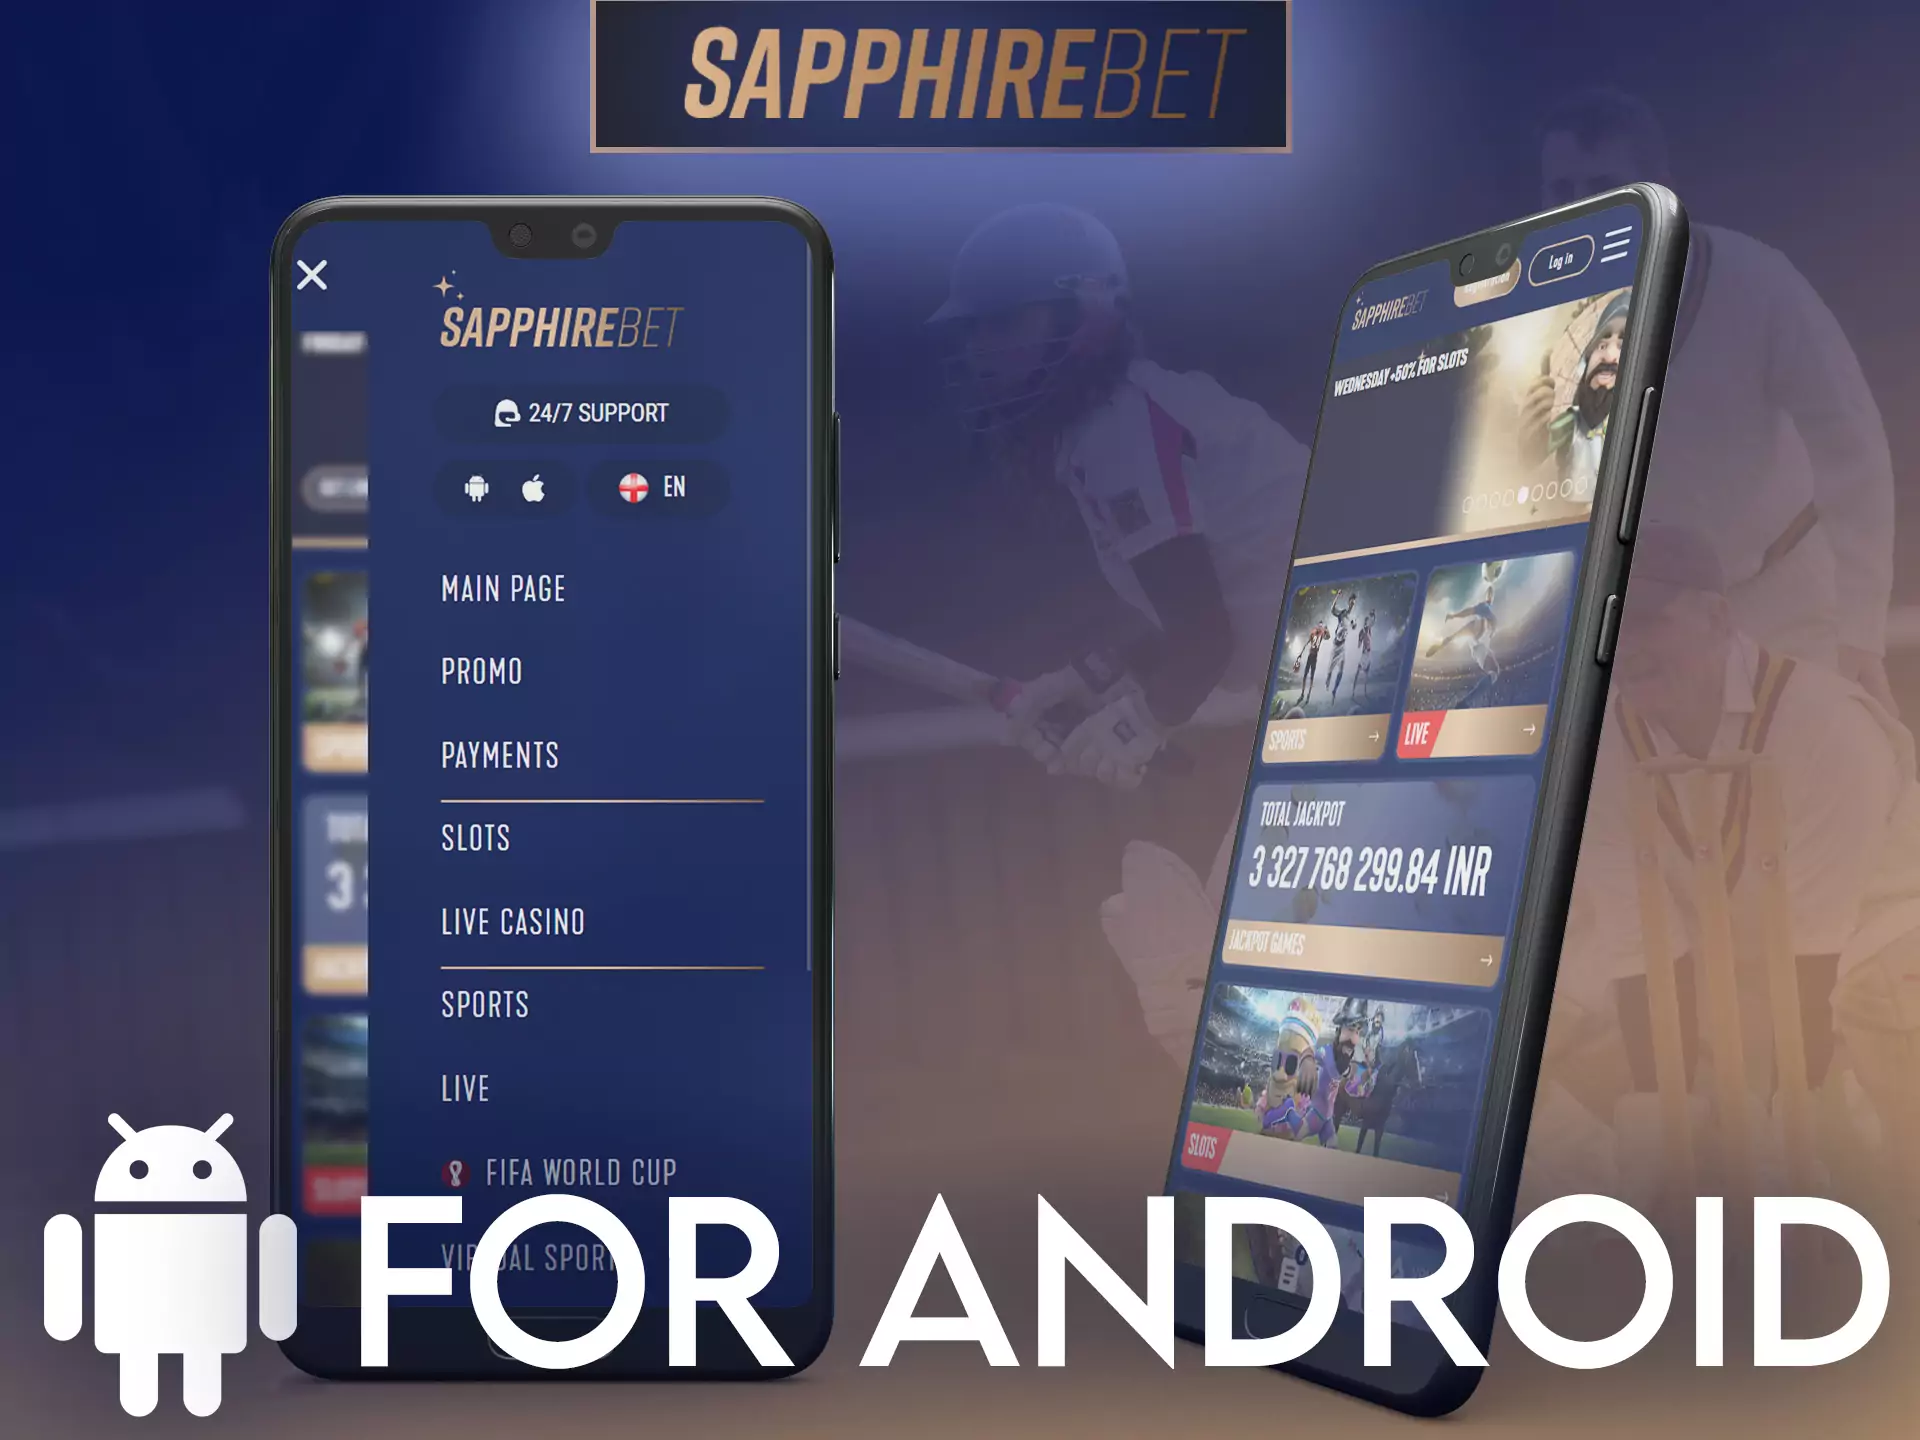 Use Sapphirebet on your Android device, get nice bonuses and place bets.